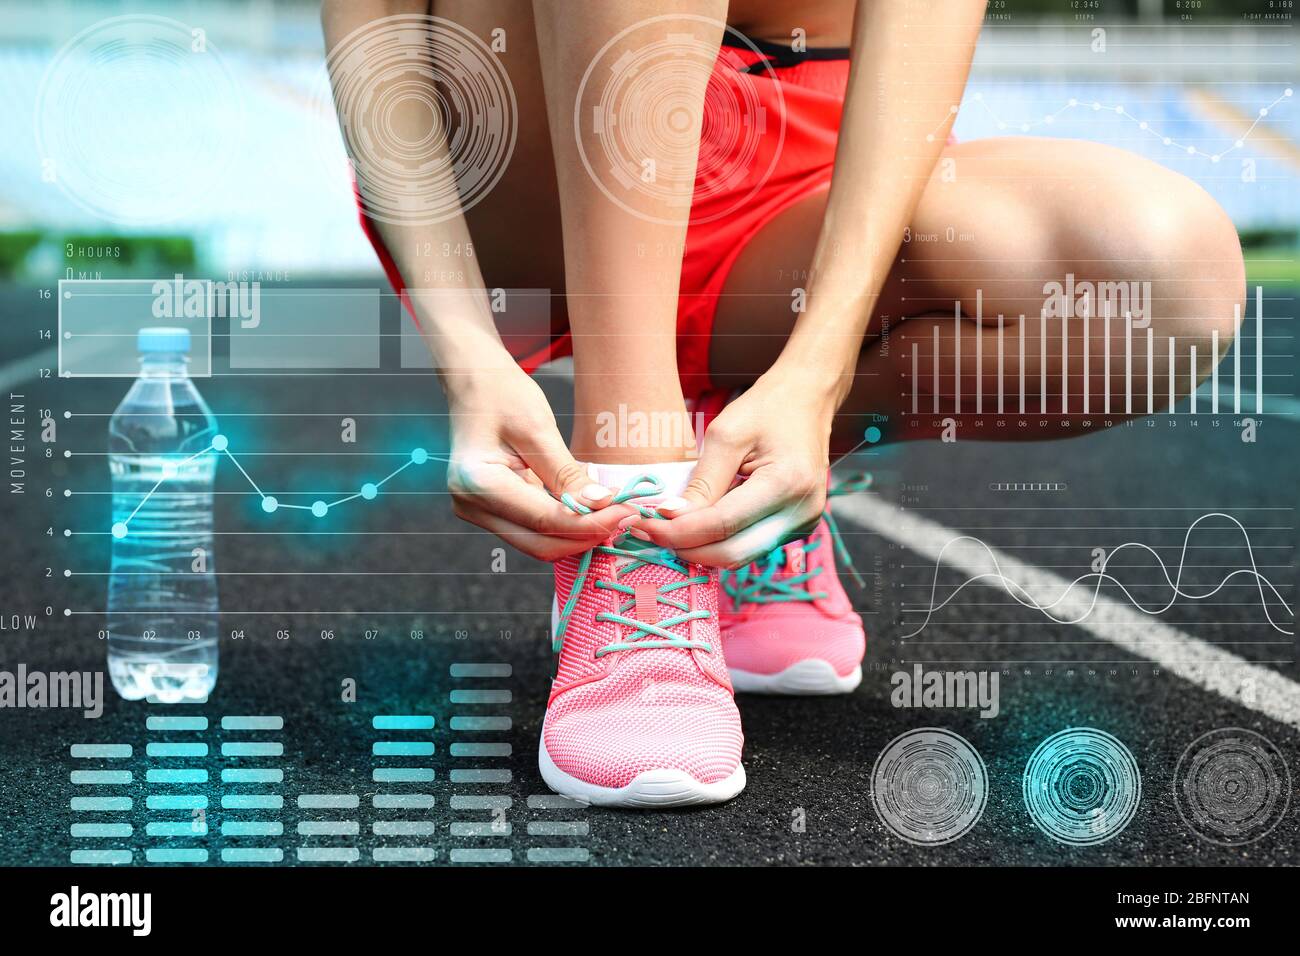 Heart rate monitor concept. Young woman tying shoelaces on morning run Stock Photo